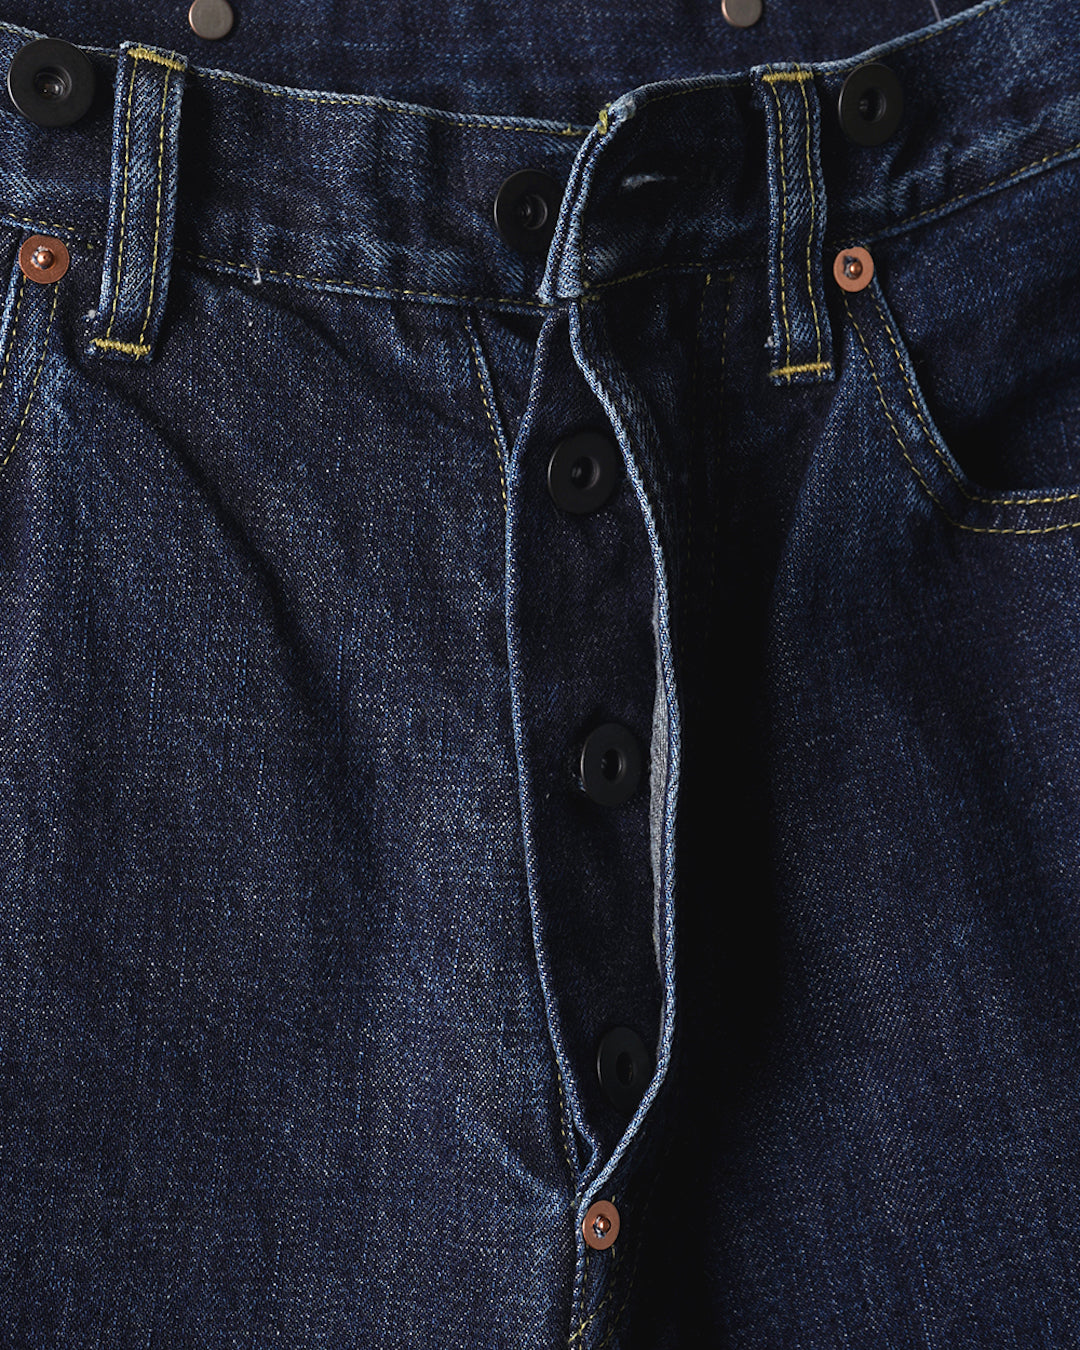 【REFOMED】RIGHT HANDED DENIM PANTS "SW" - STONE WASH